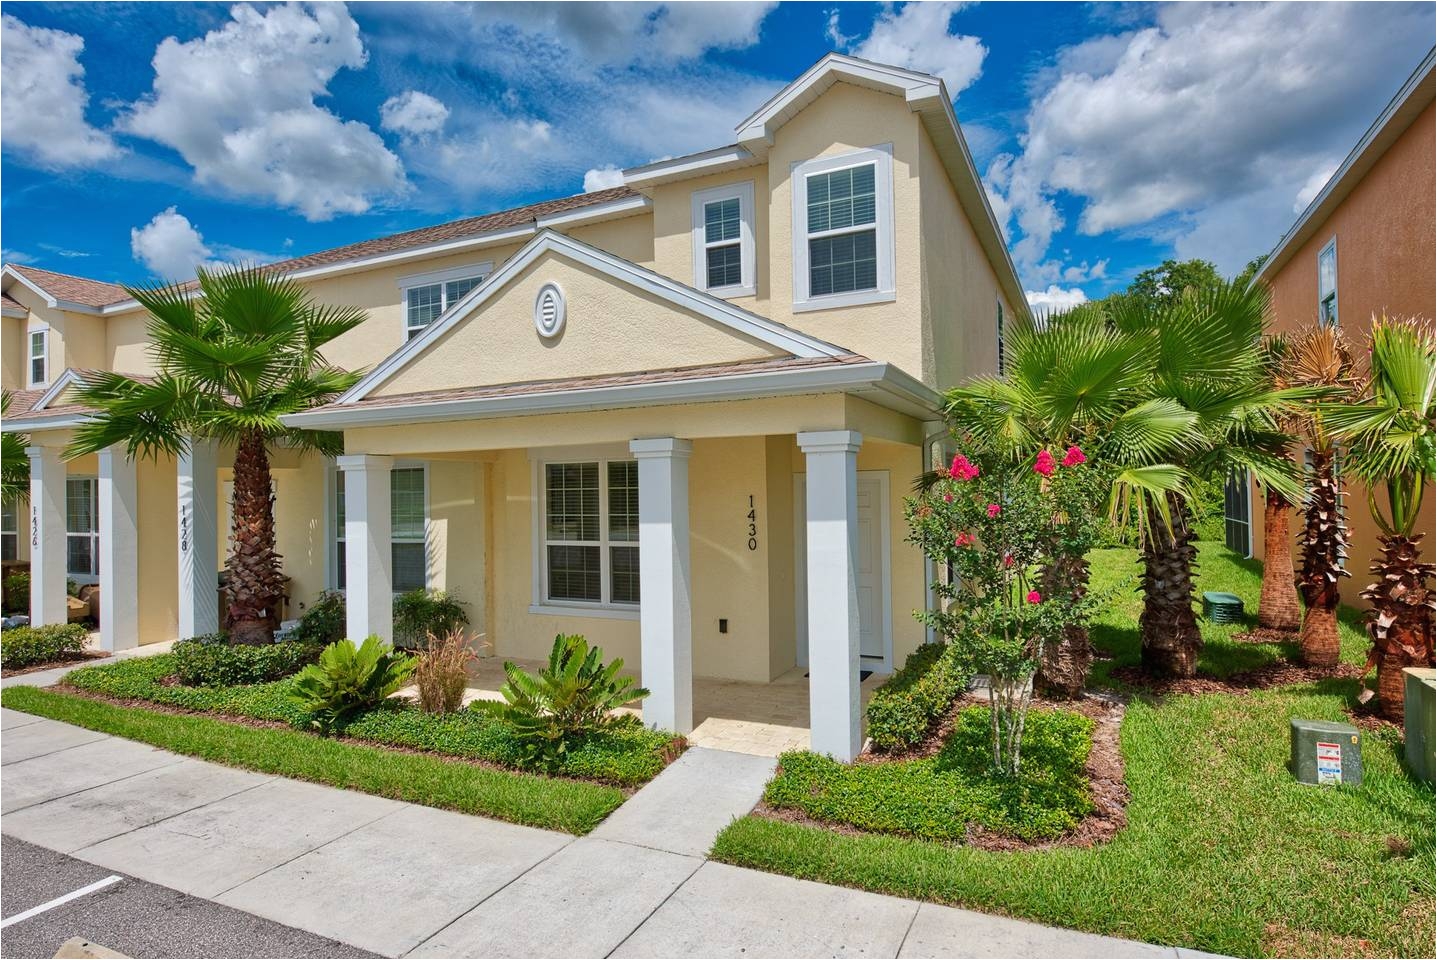 beautiful 3 bedroom suites serenity resort townhouses for rent in clermont florida united states